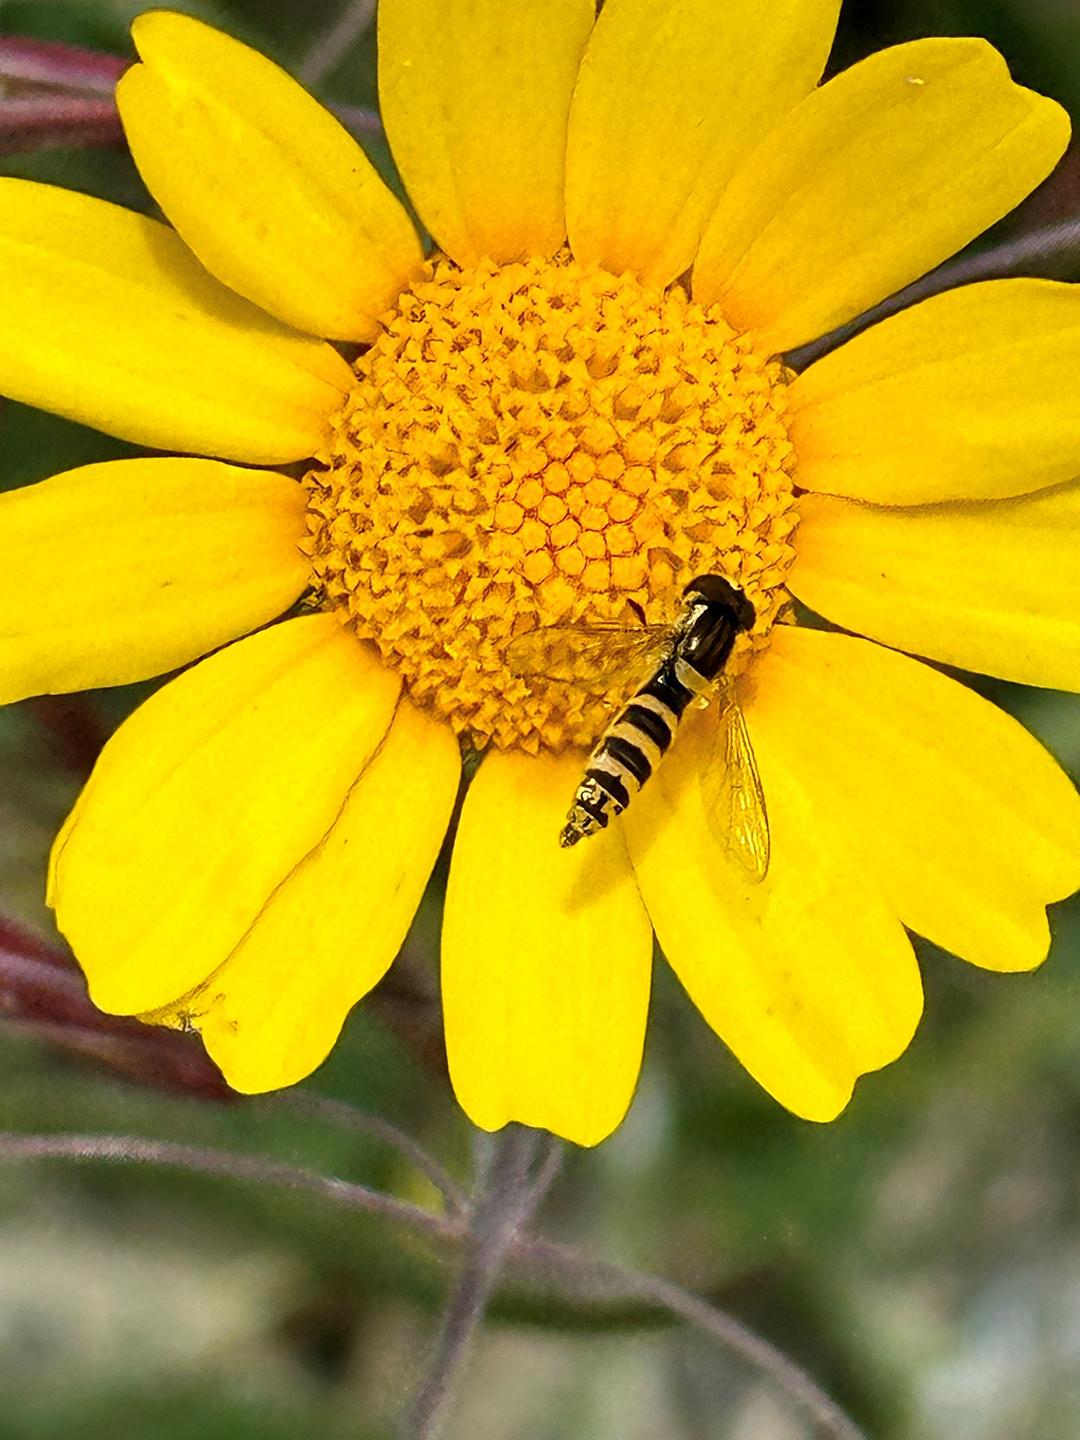 Hoverfly on a yellow flower, in Cyprus